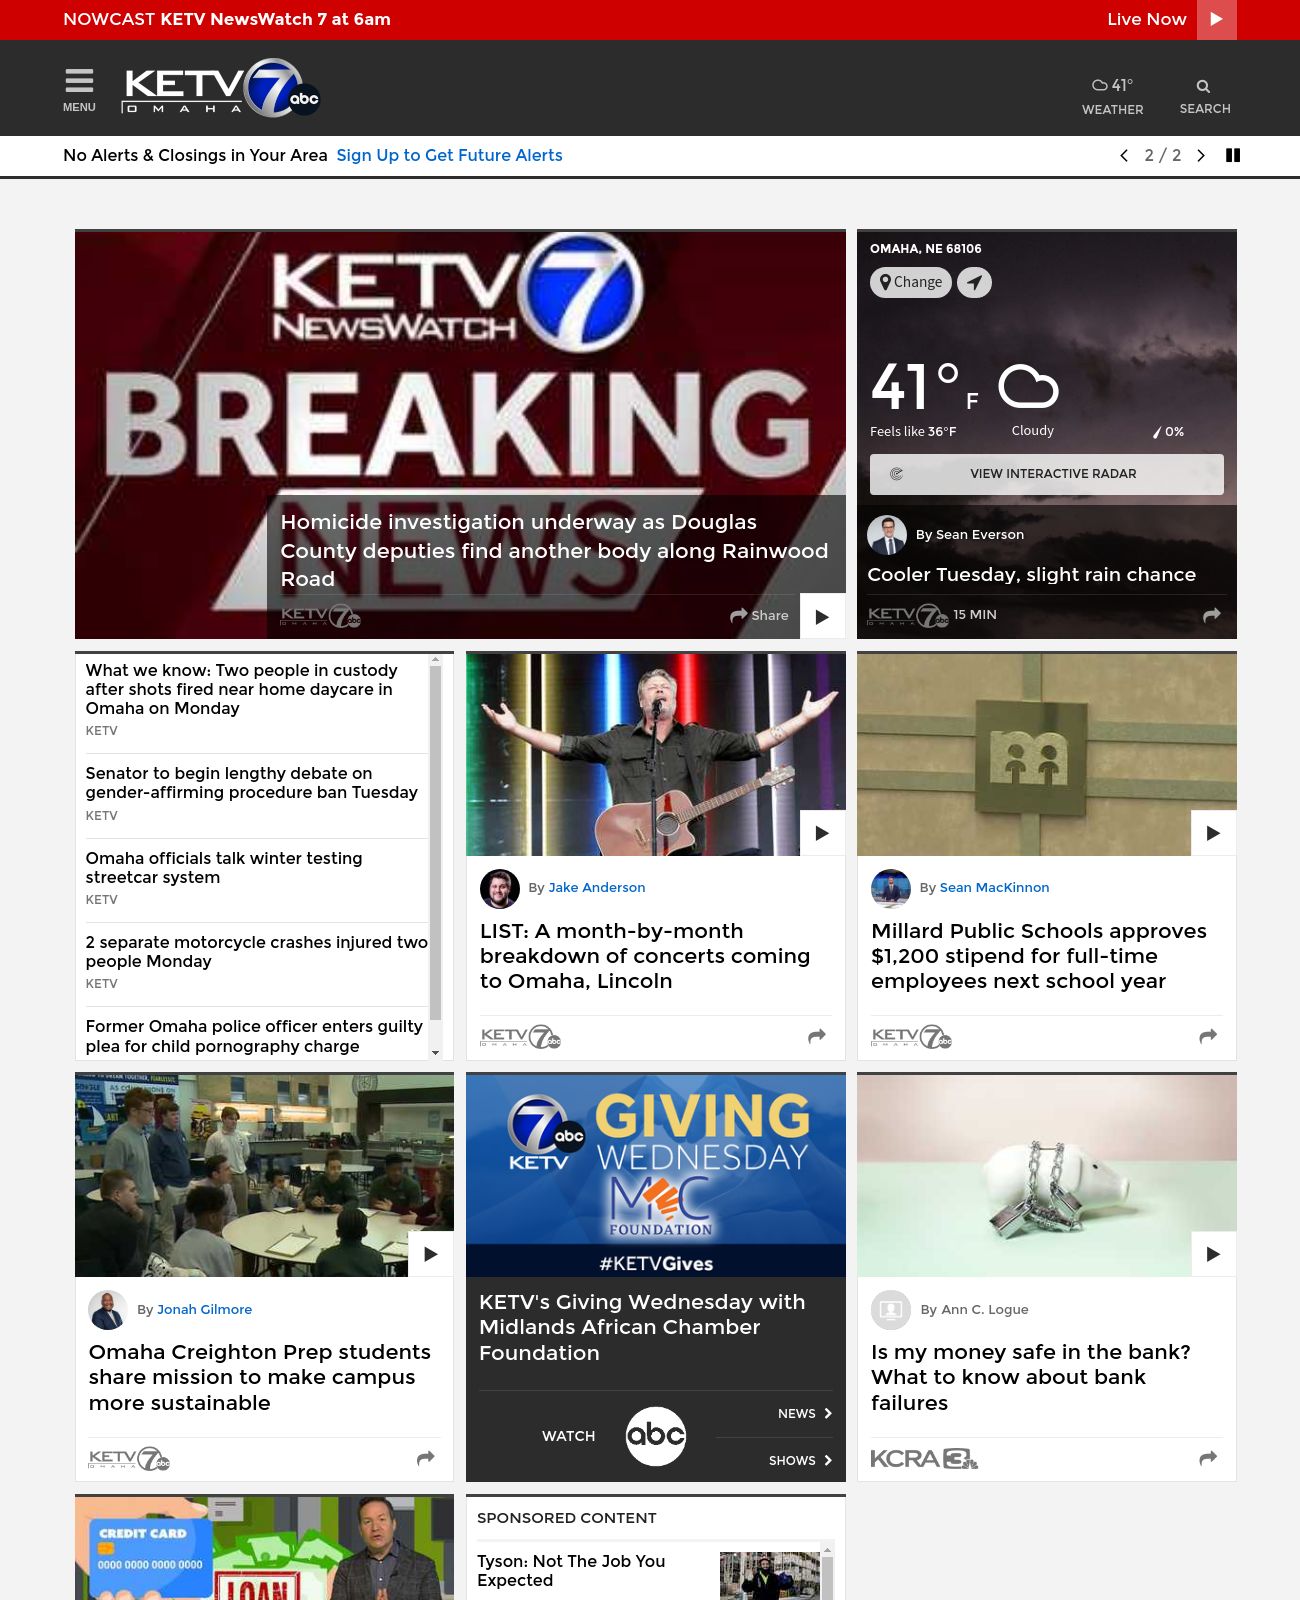 KETV NewsWatch 7 at 2023-03-21 06:20:33-05:00 local time